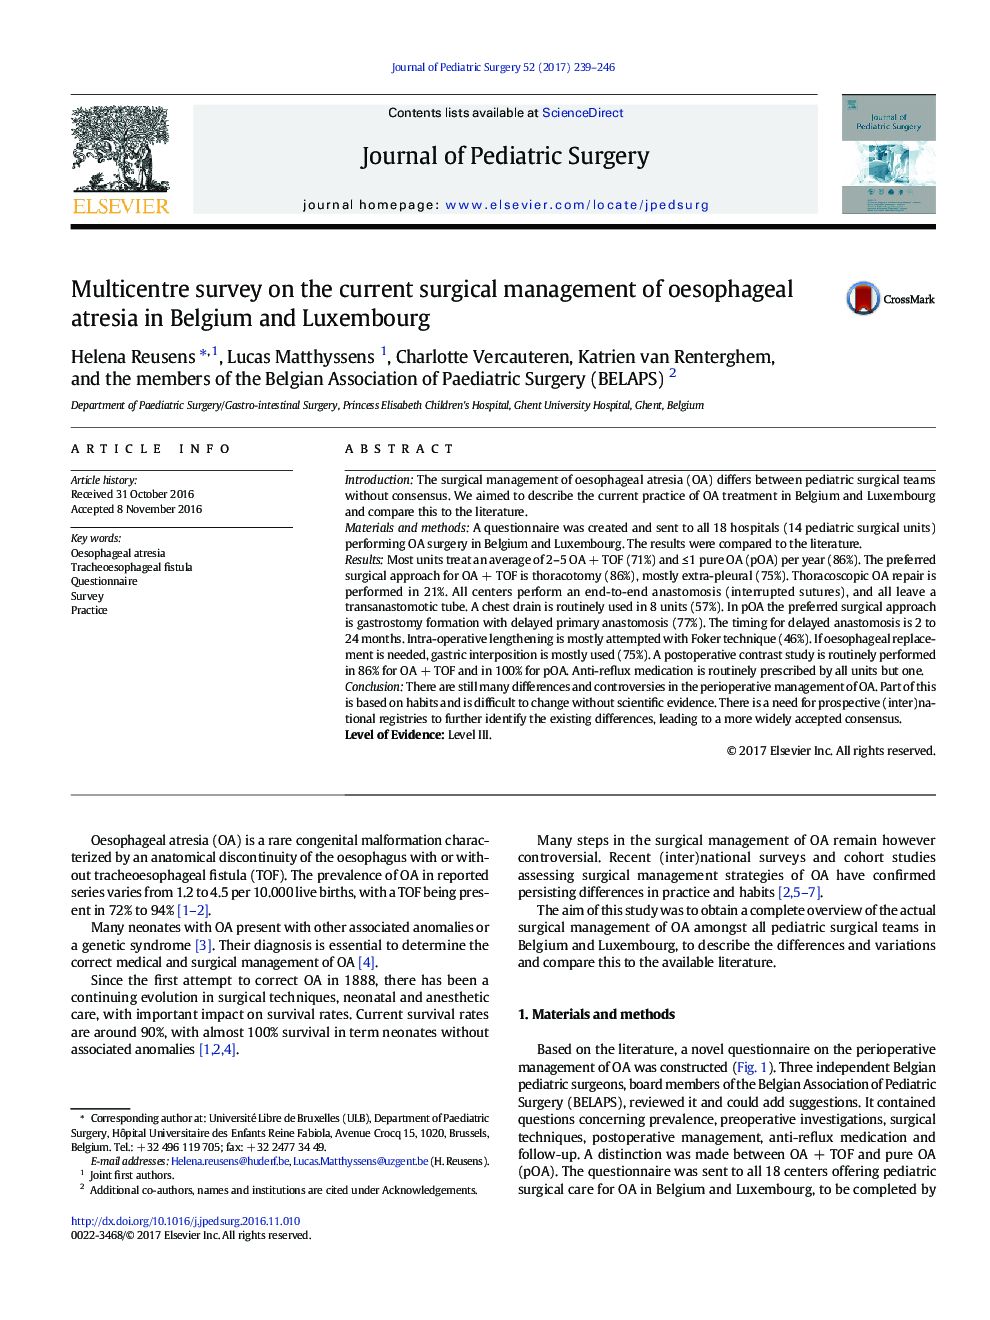 BAPS PapersMulticentre survey on the current surgical management of oesophageal atresia in Belgium and Luxembourg